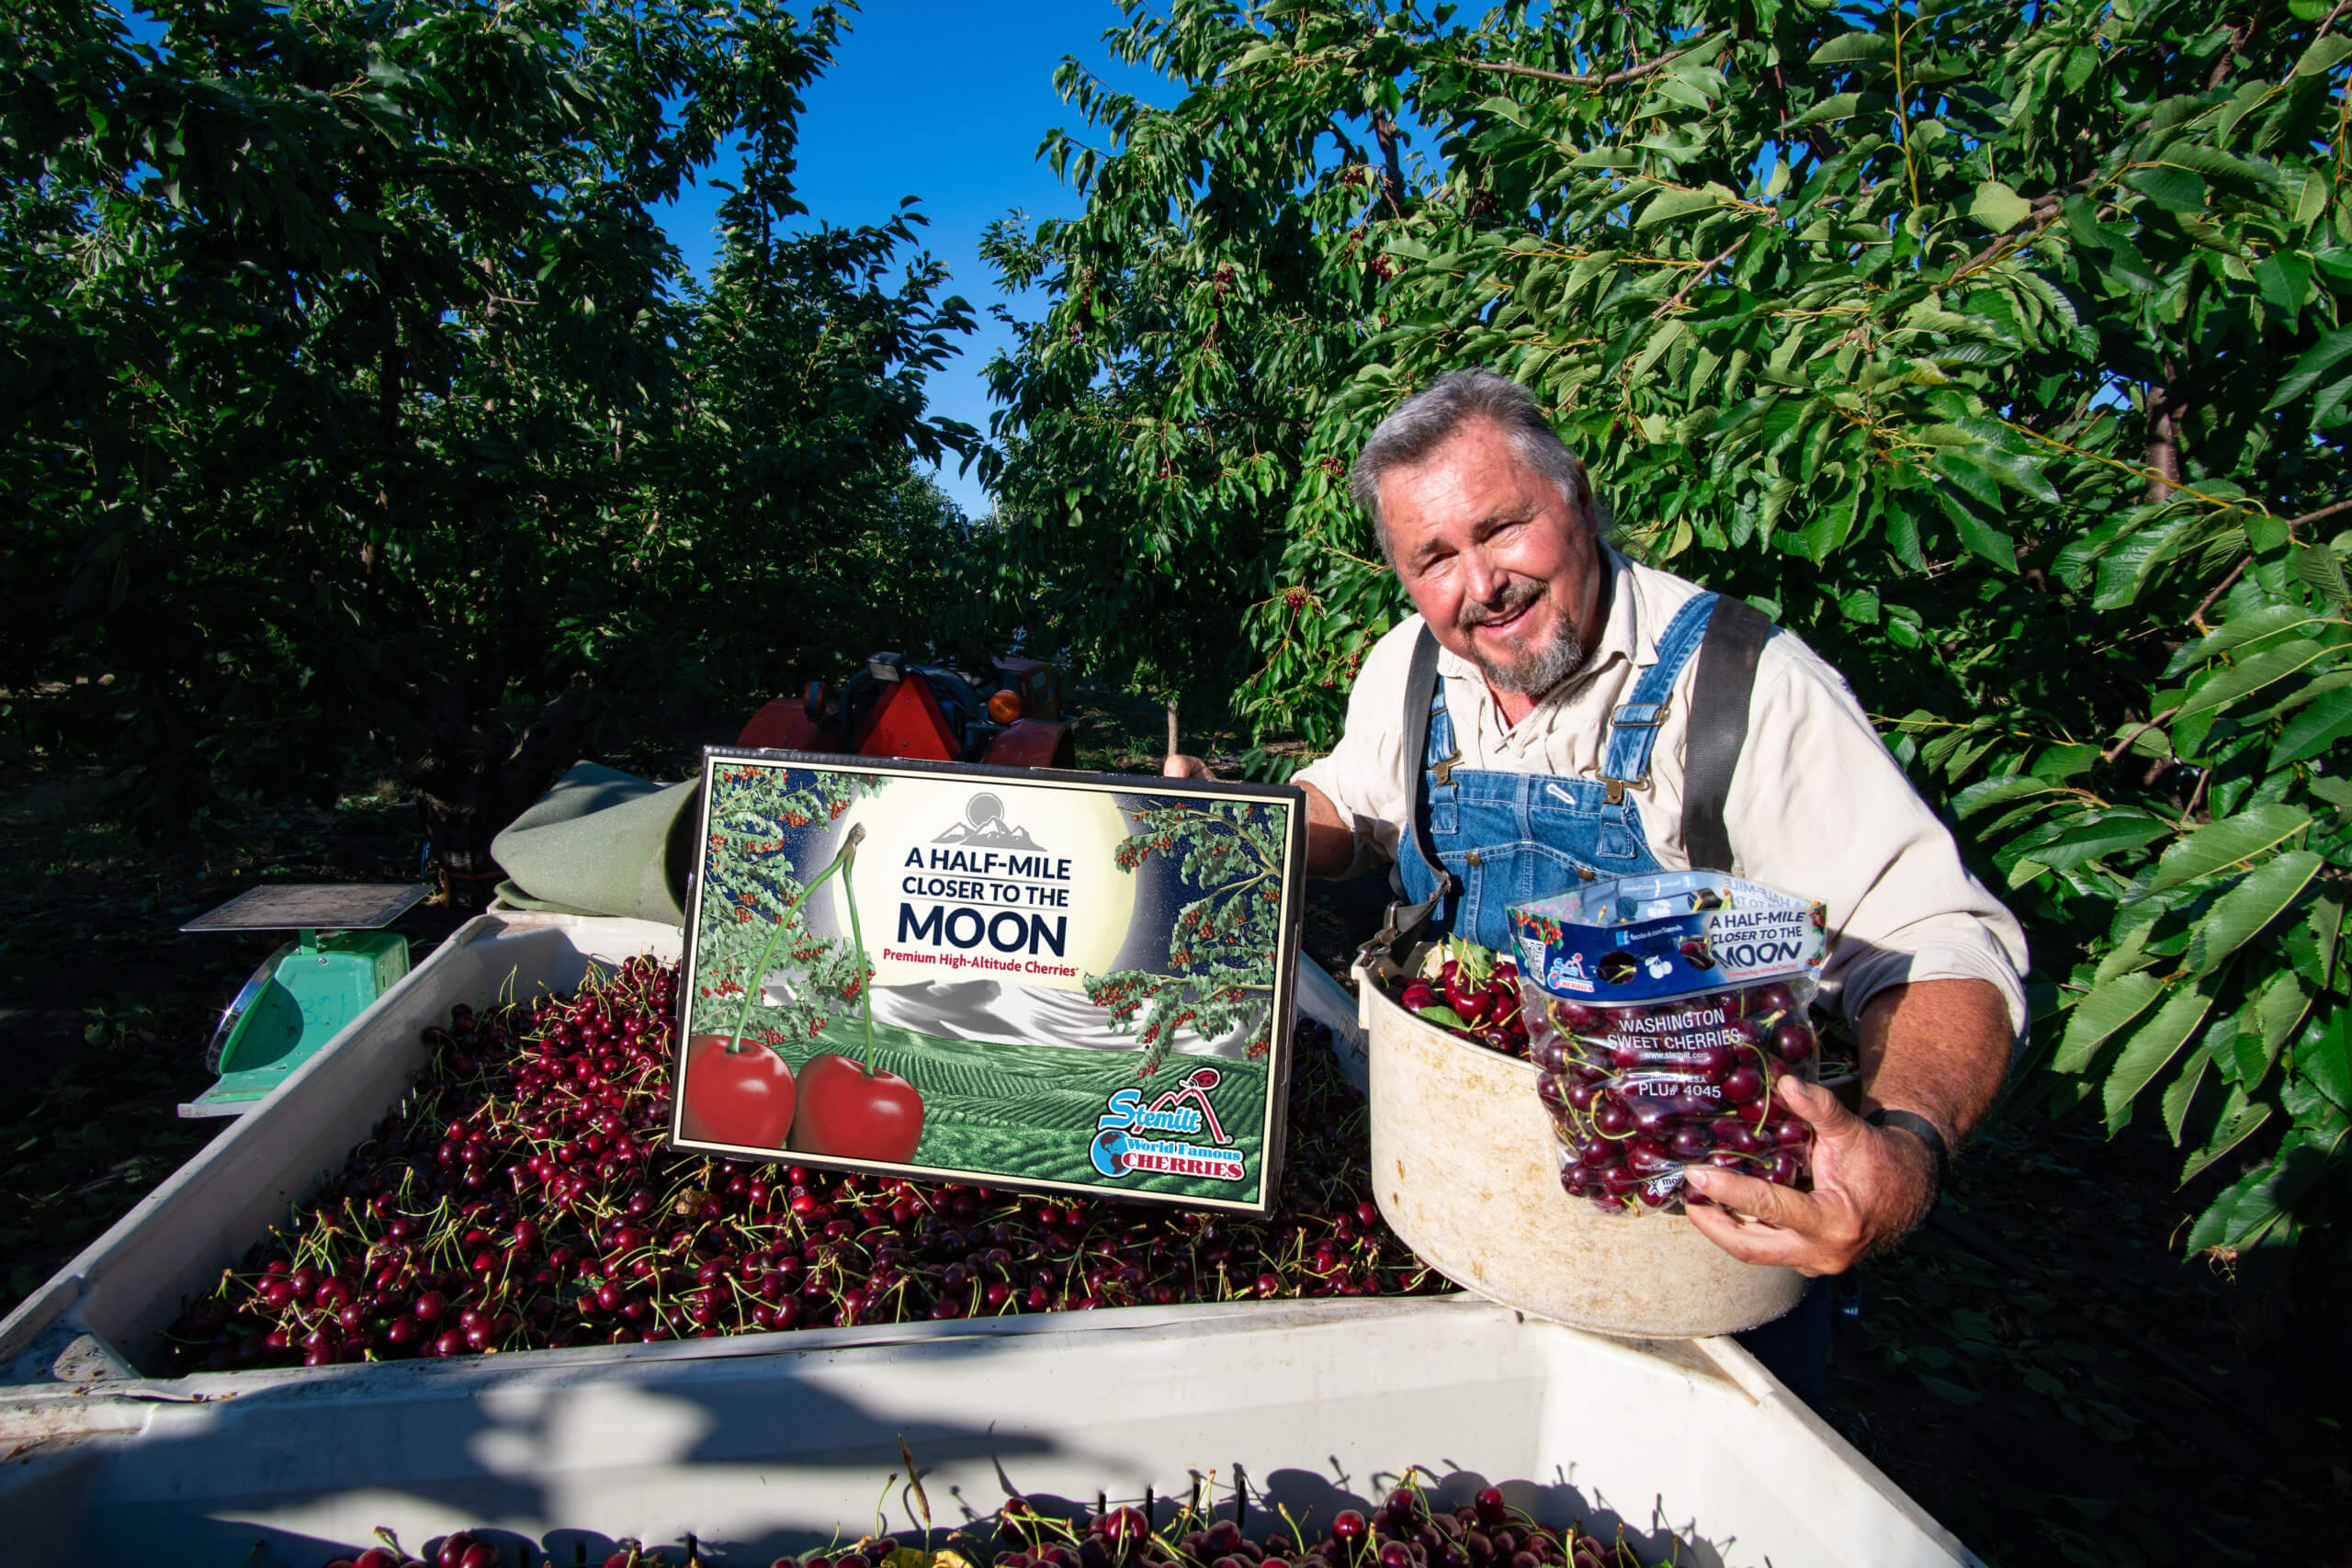 Different types of cherries: large container of Moon Cherries seen with grower Kyle